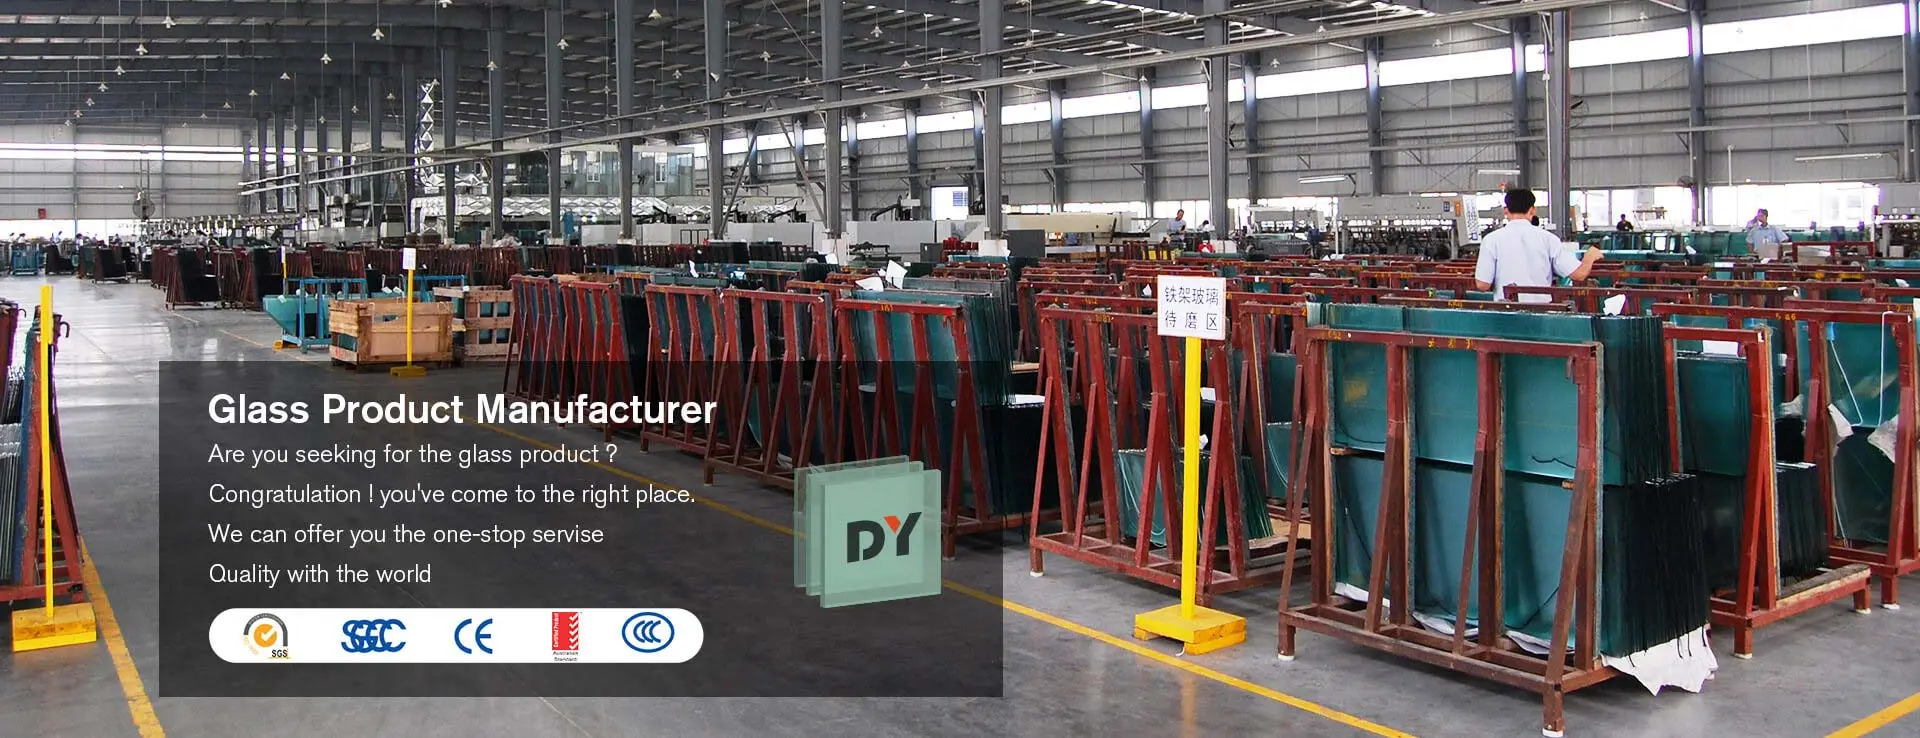 Glass Product Manufacture